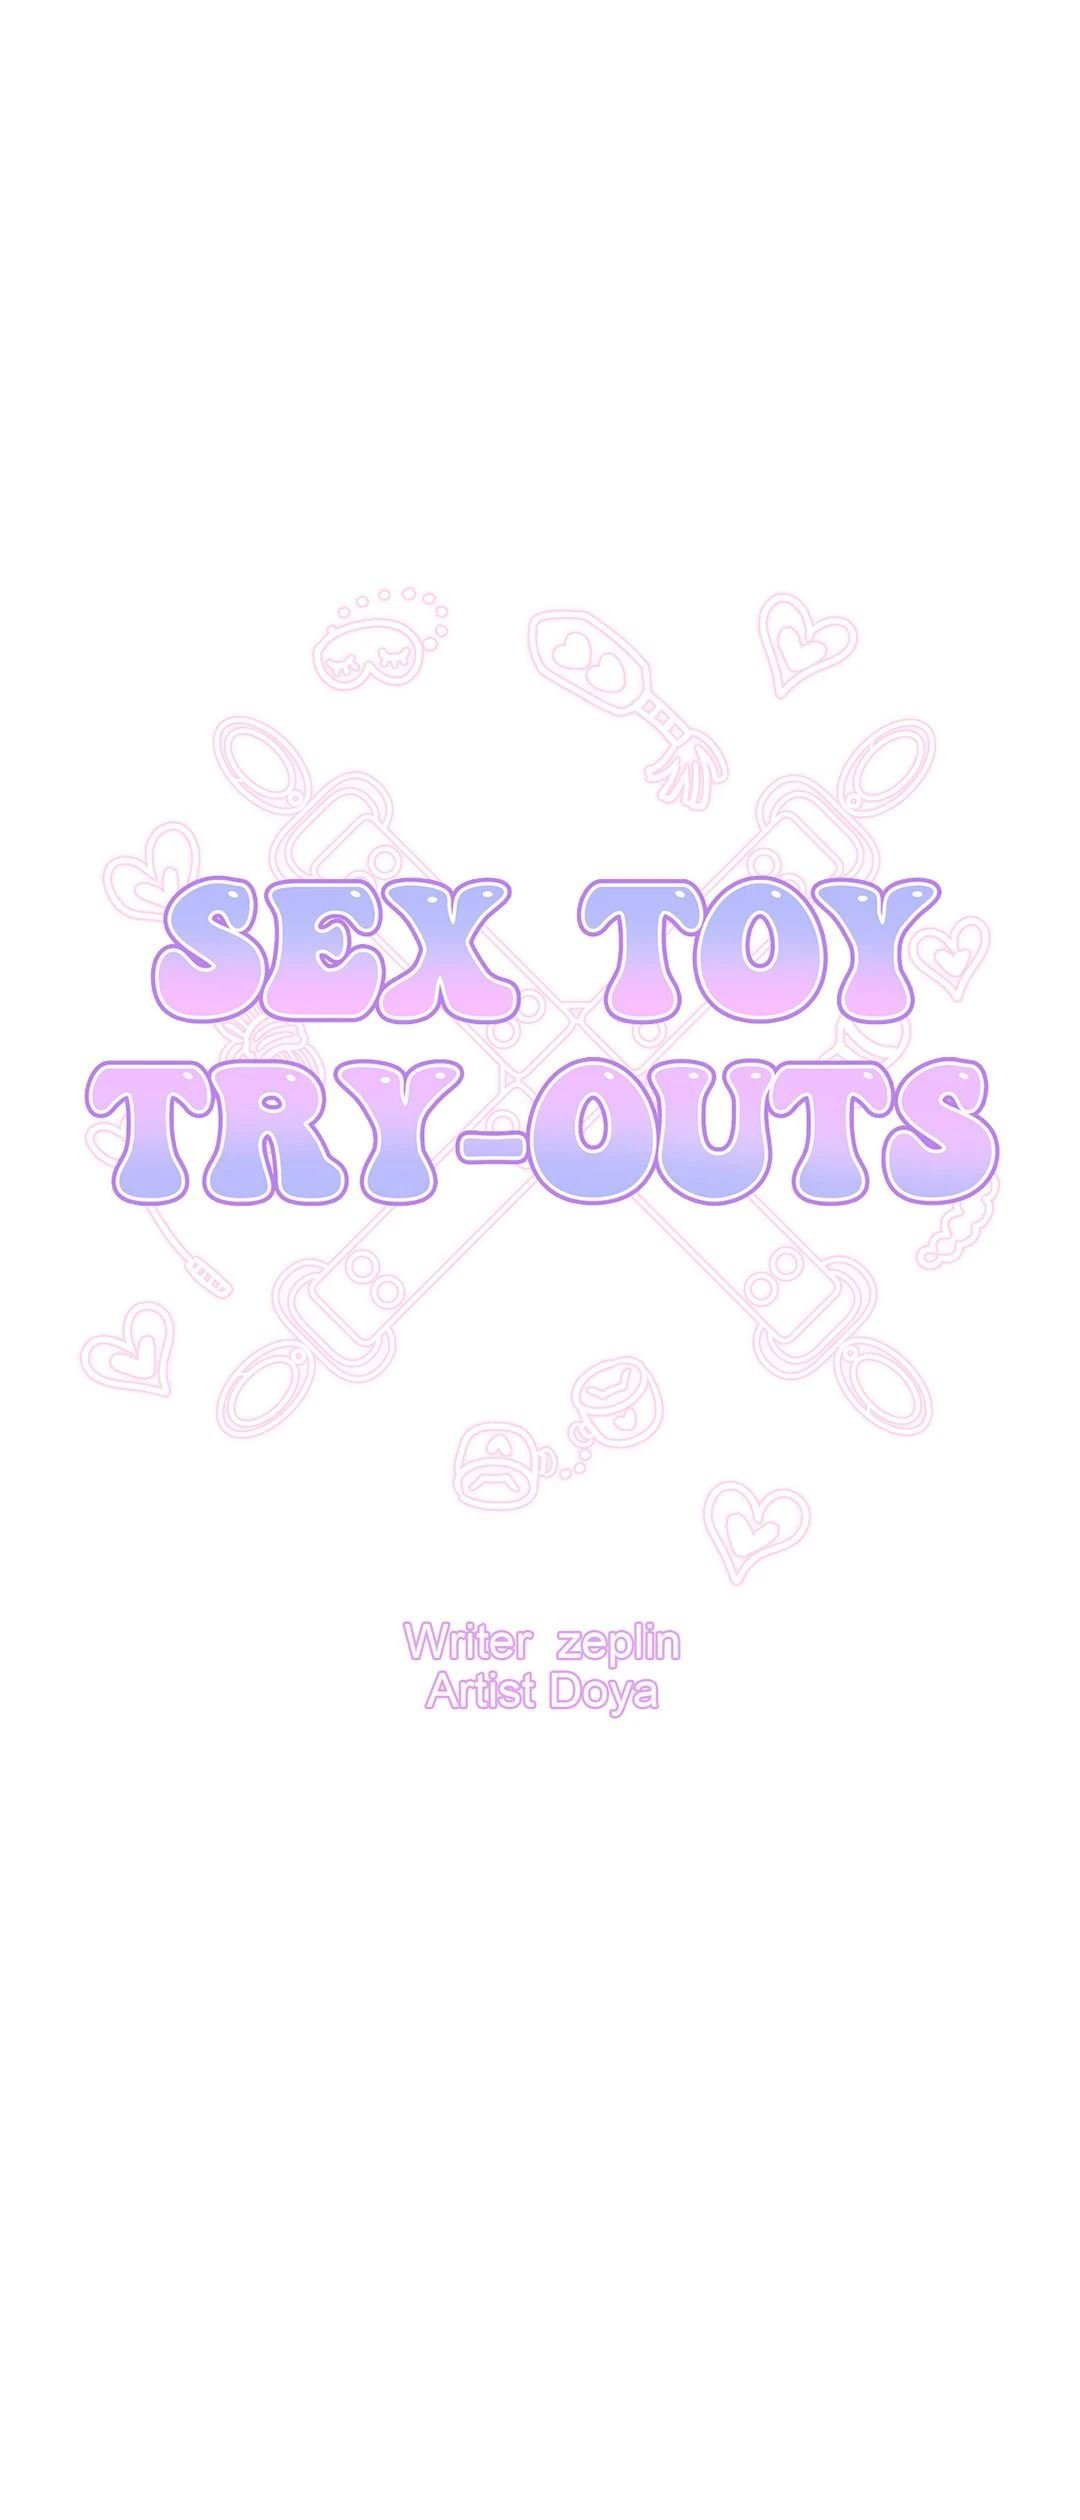 sex-toy-try-outs-chap-25-3